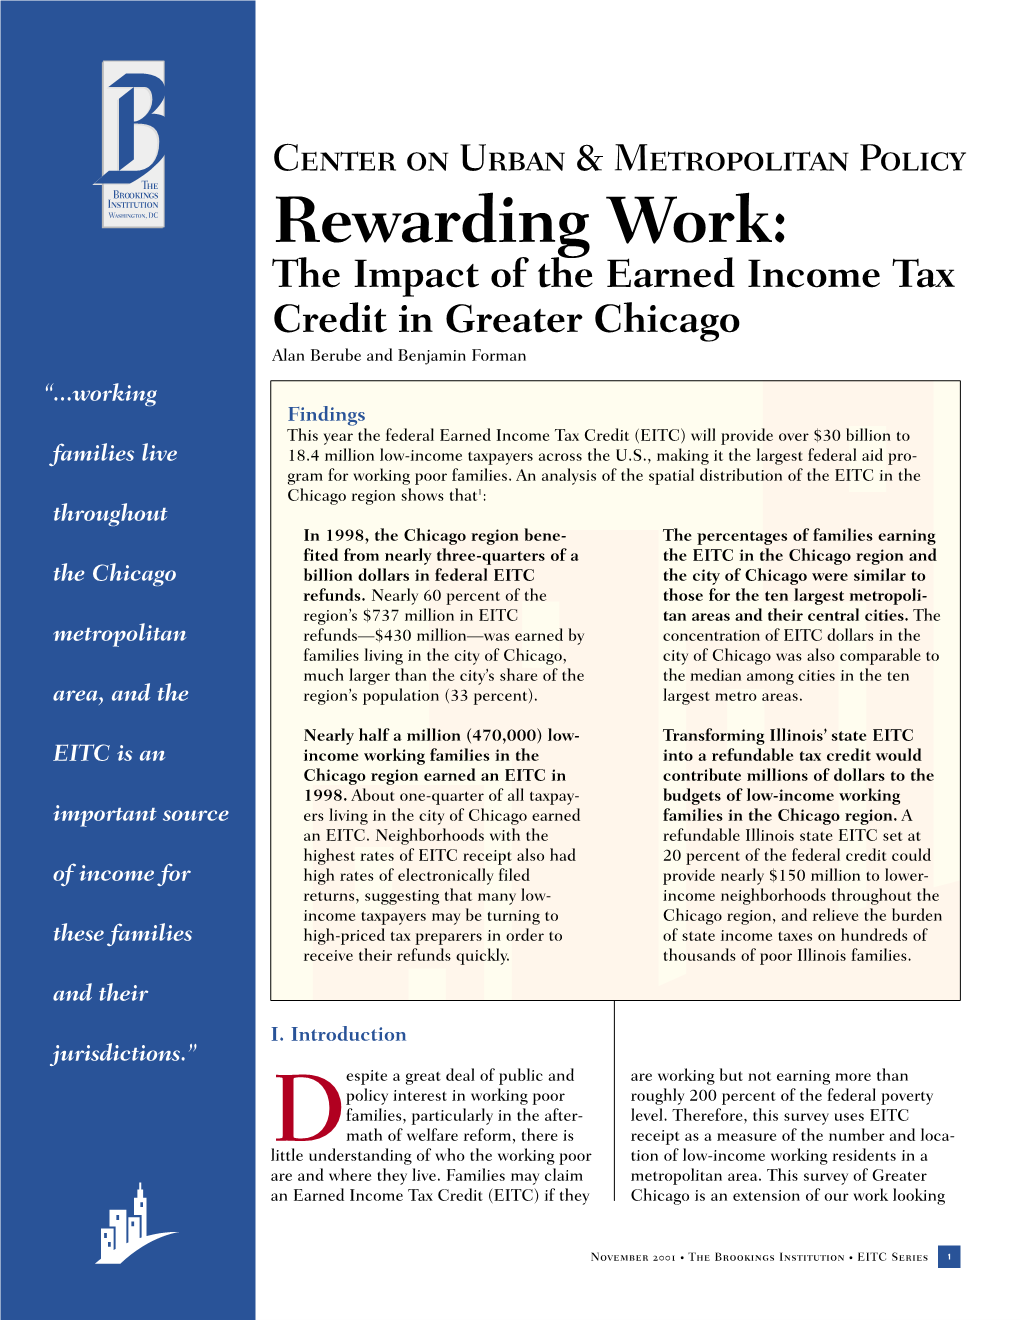 Rewarding Work: the Impact of the Earned Income Tax Credit in Greater Chicago